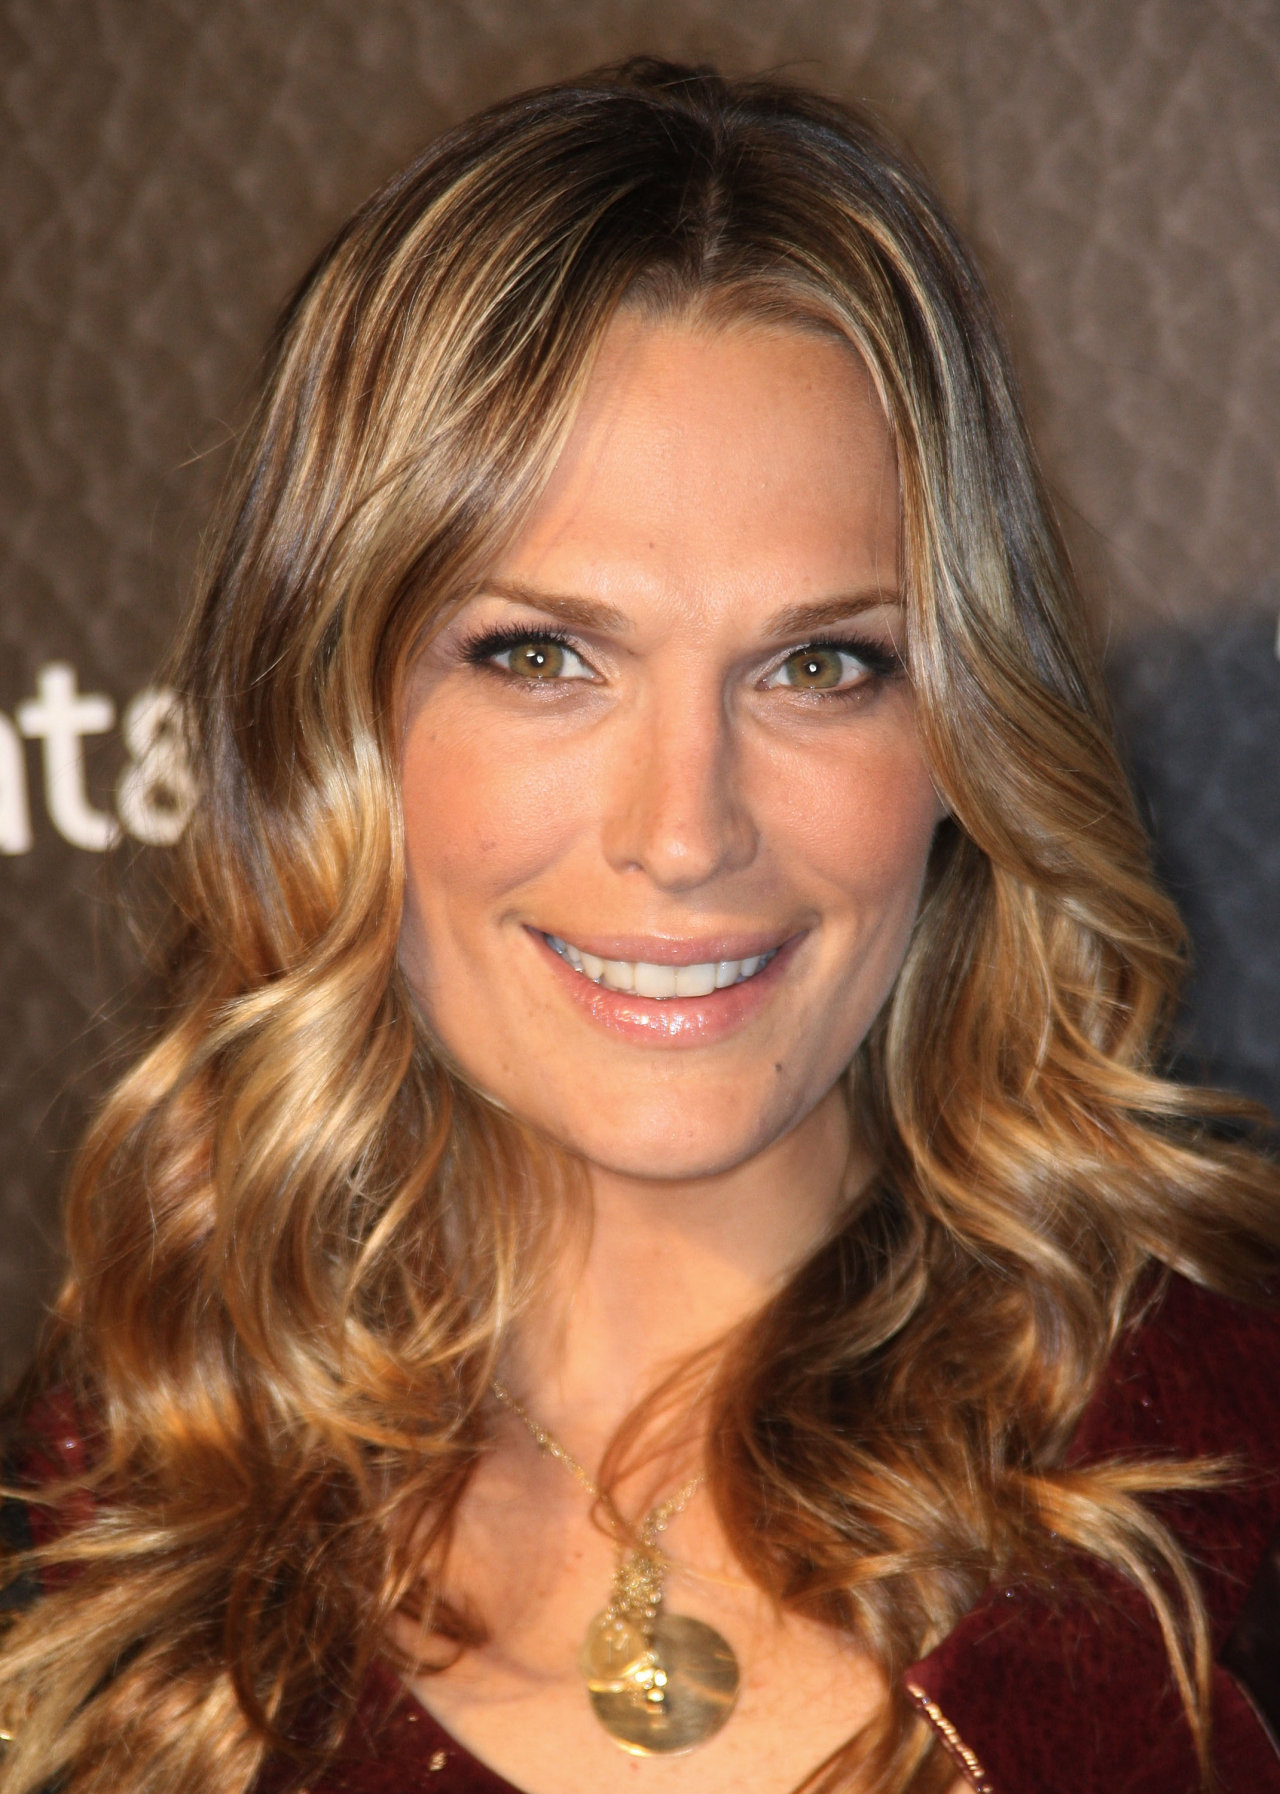 Molly Sims leaked wallpapers